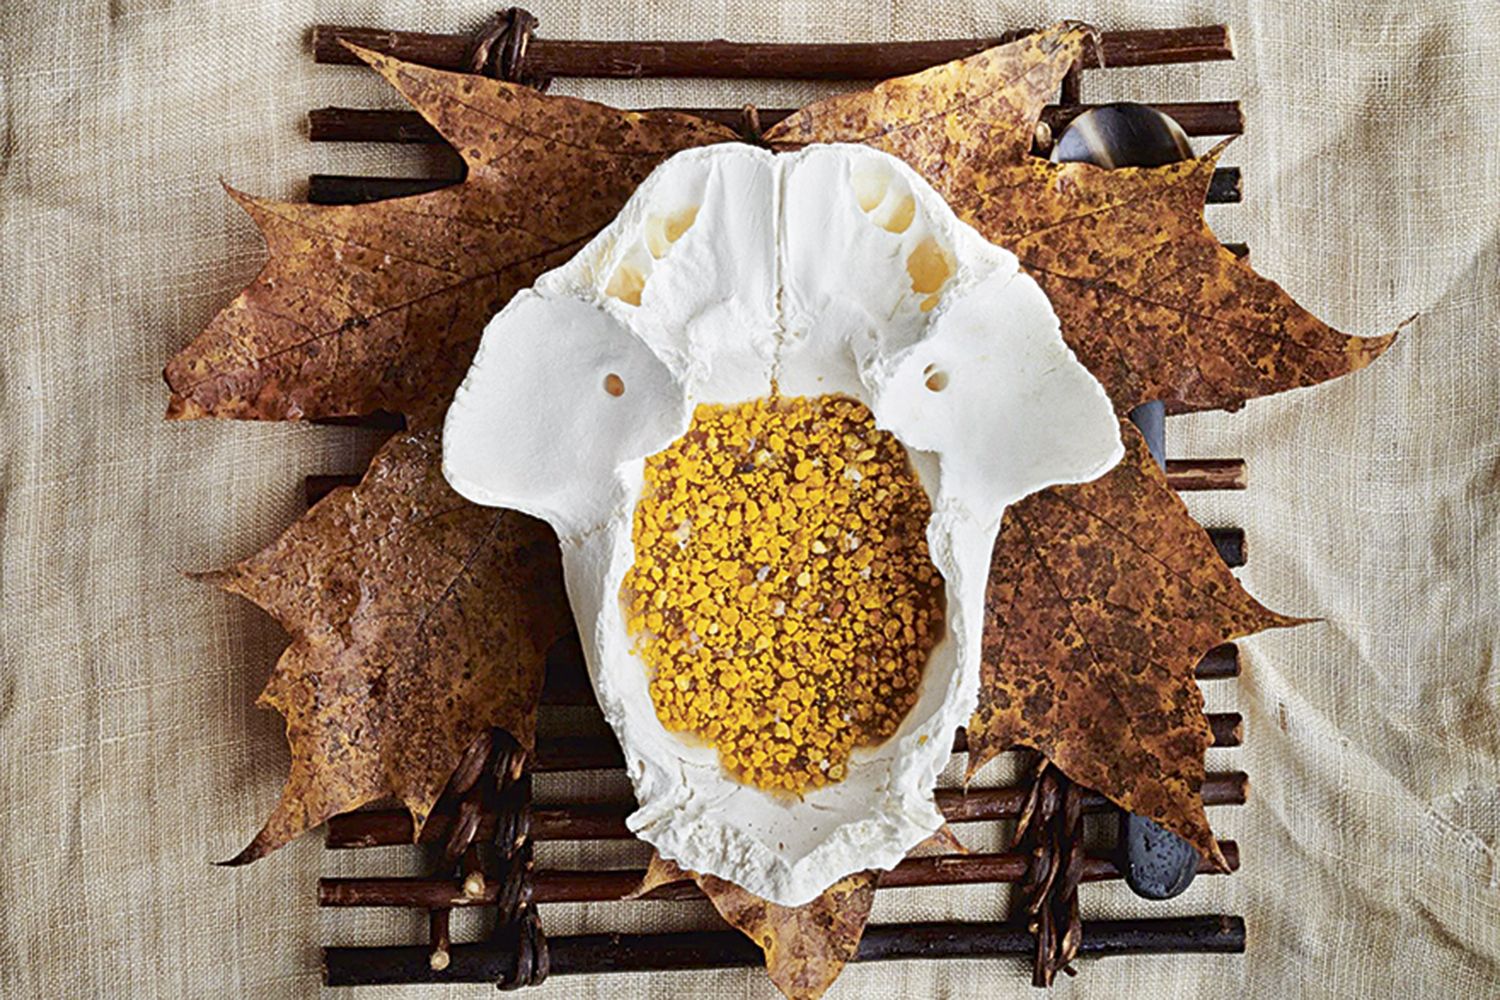 BOLD AND HARMONY - Reindeer core sprinkled with bee pollen, from Noma: difficult to swallow, the delicacy is served in the animal's skull (well bleached) -